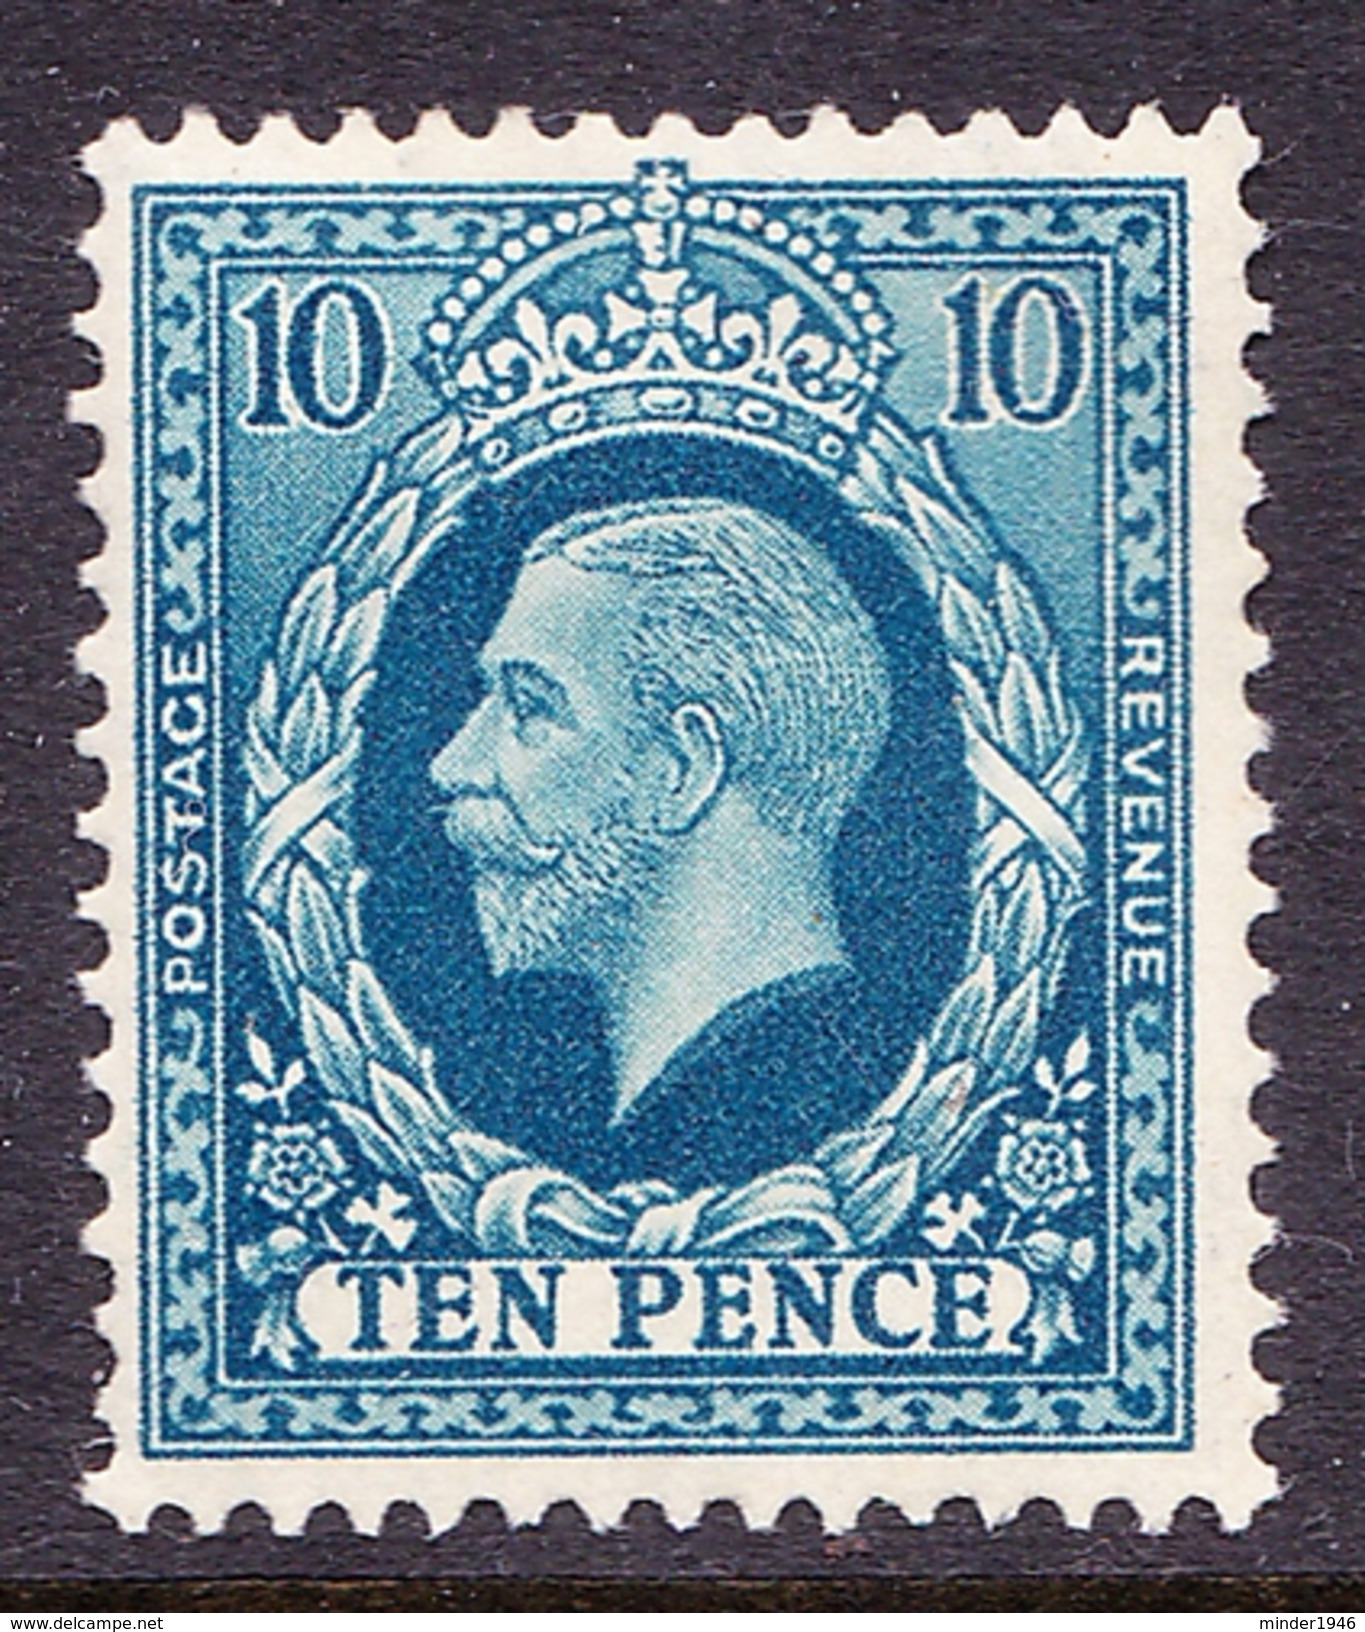 GREAT BRITAIN 1936 KGV 10d Turquoise Blue SG 448 MH - Unused Stamps